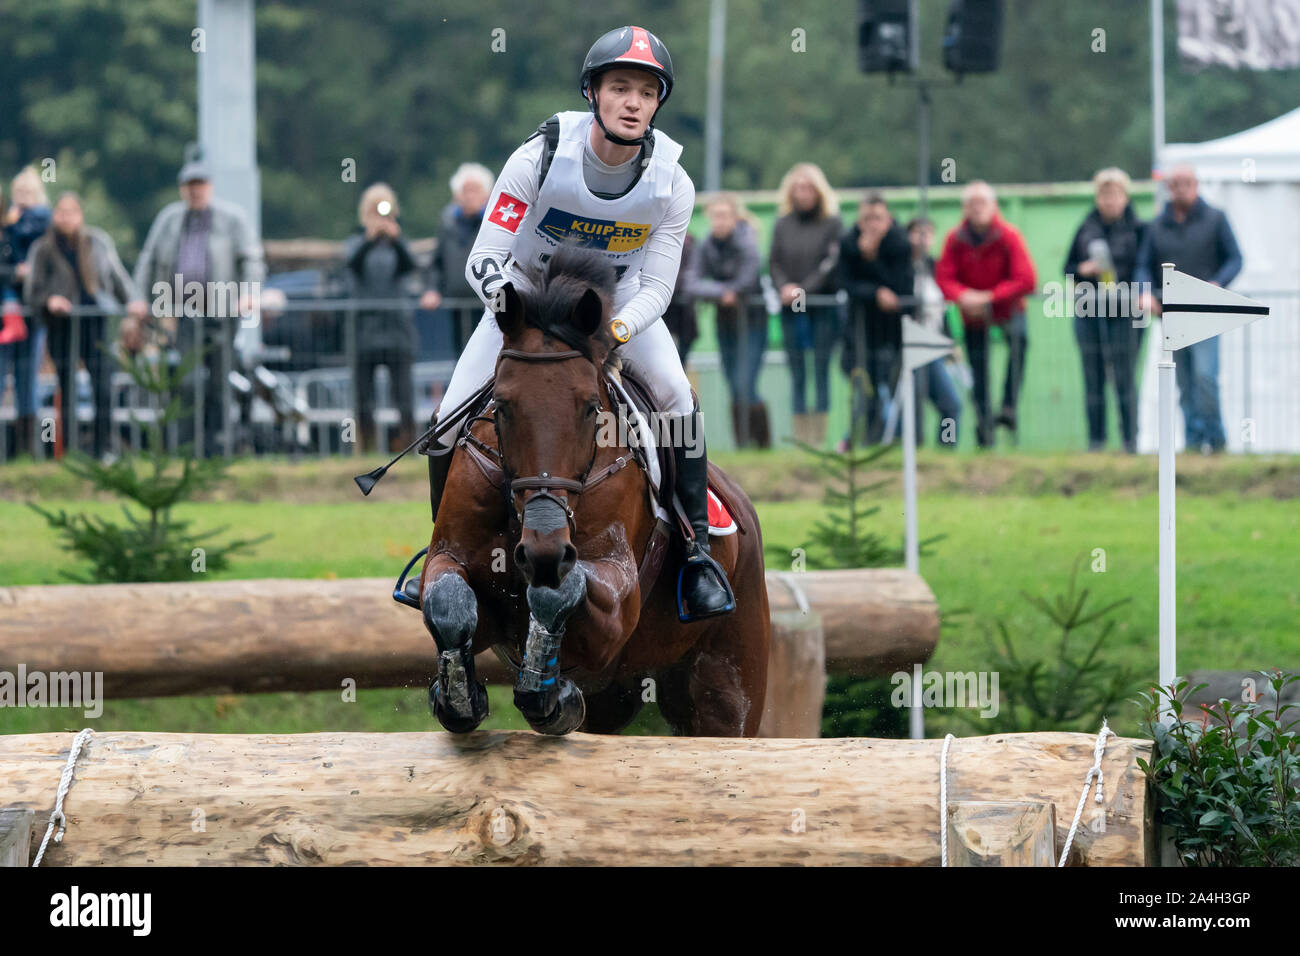 Robin Godel SUI with Grandeur de Lully CH during Military Boekelo on the 12th of October 2019 in Enschede, Netherlands. (Photo by Sander Chamid/SCS) Stock Photo